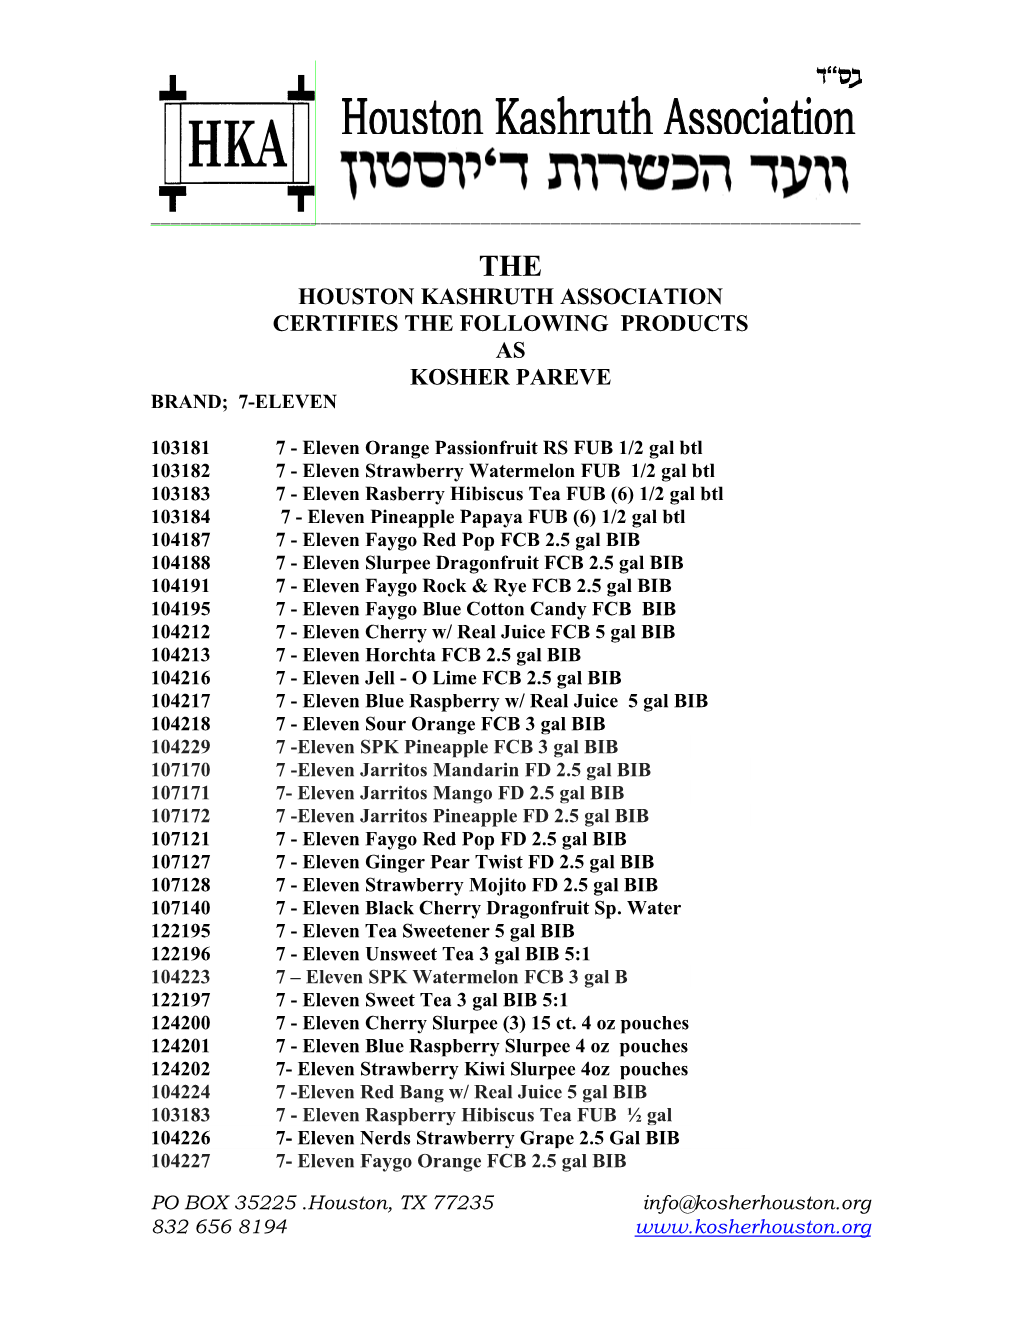 Houston Kashruth Association Certifies the Following Products As Kosher Pareve Brand; 7-Eleven